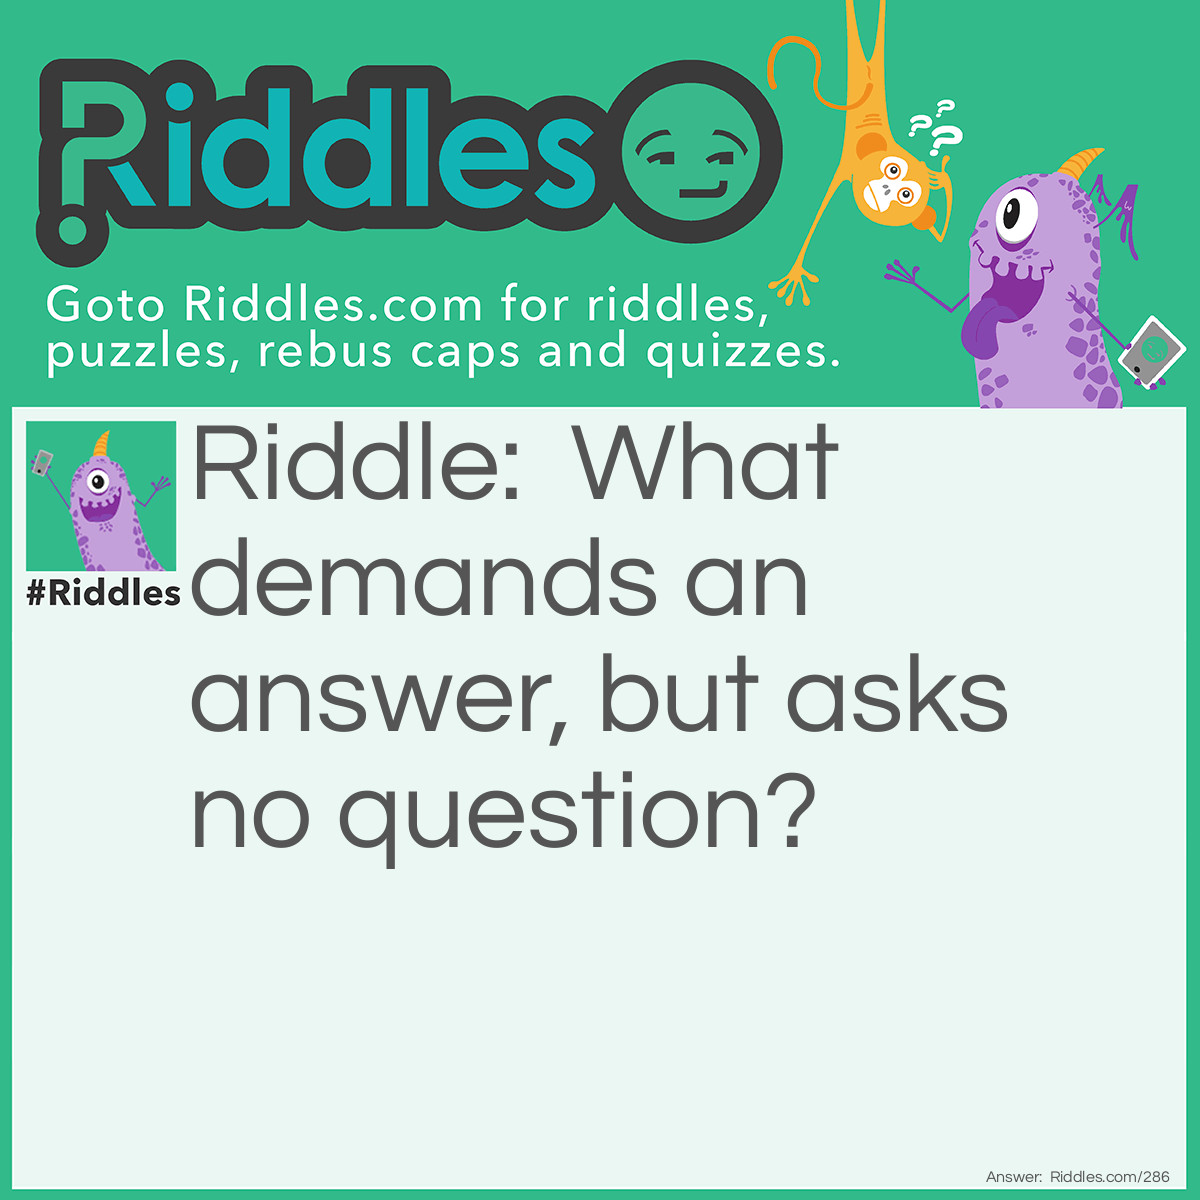 Riddle: What demands an answer, but asks no question? Answer: A Telephone.